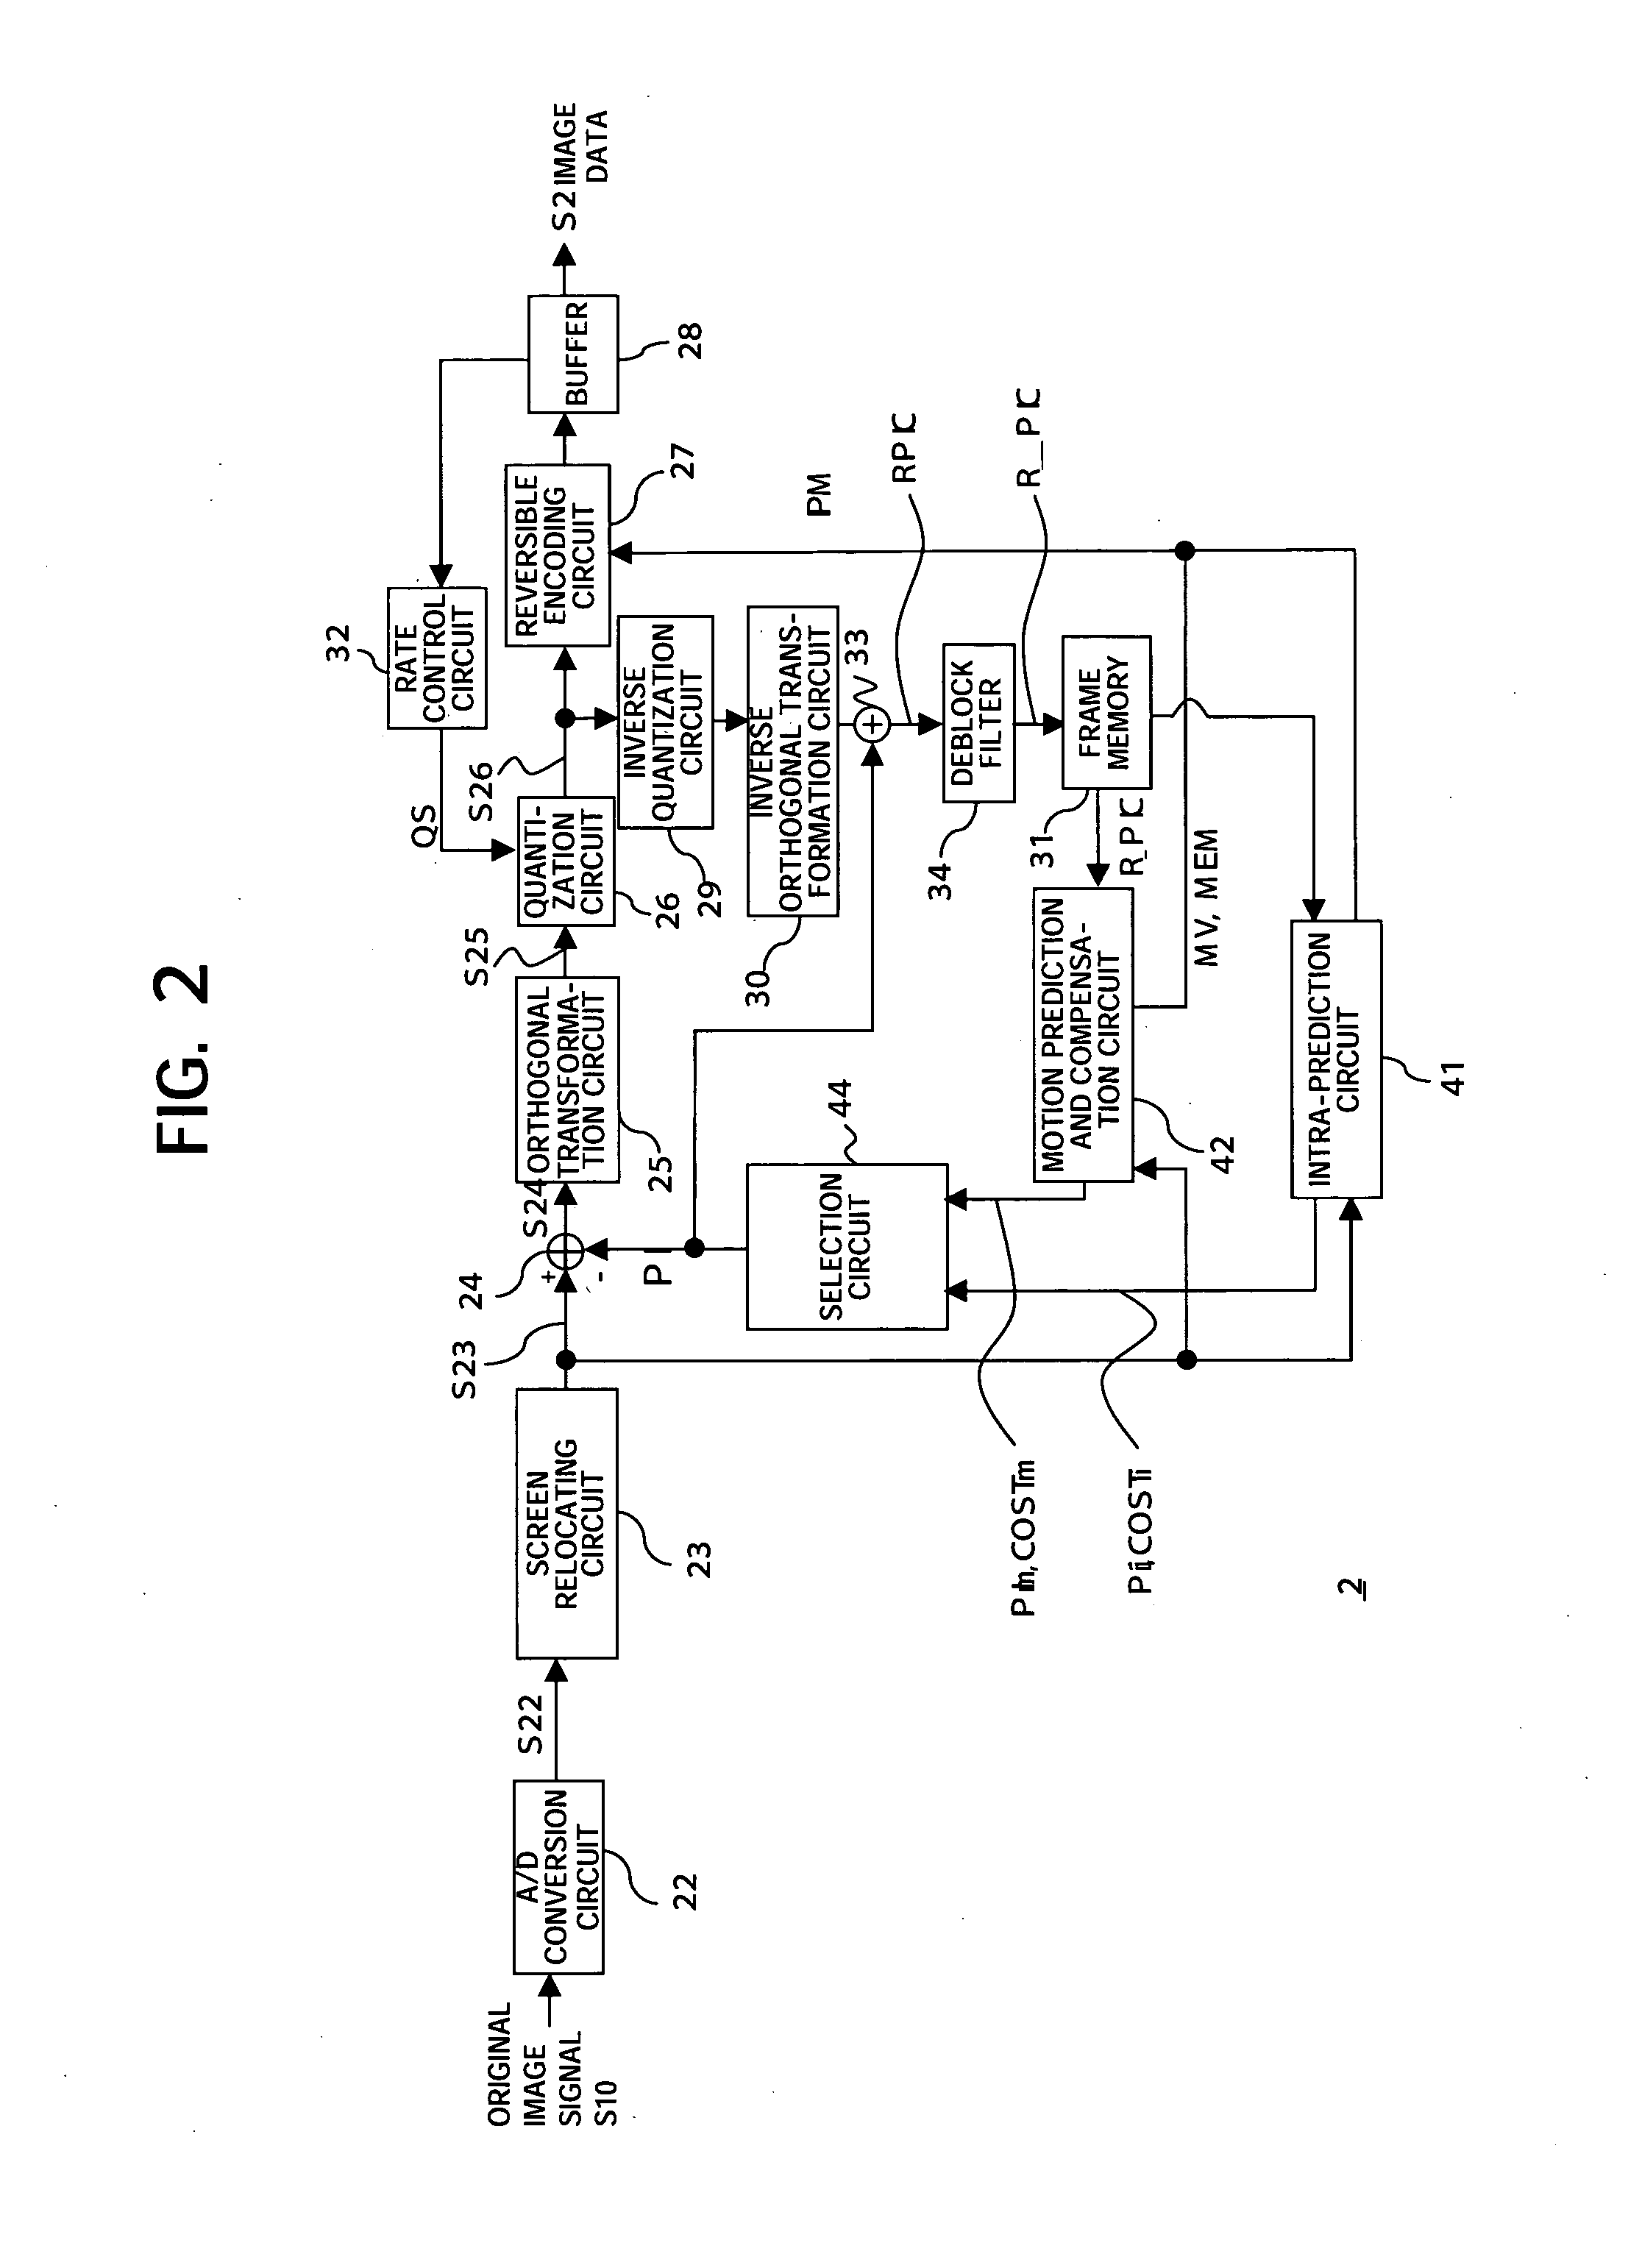 Data processing apparatus, image processing apparatus, and methods and programs thereof